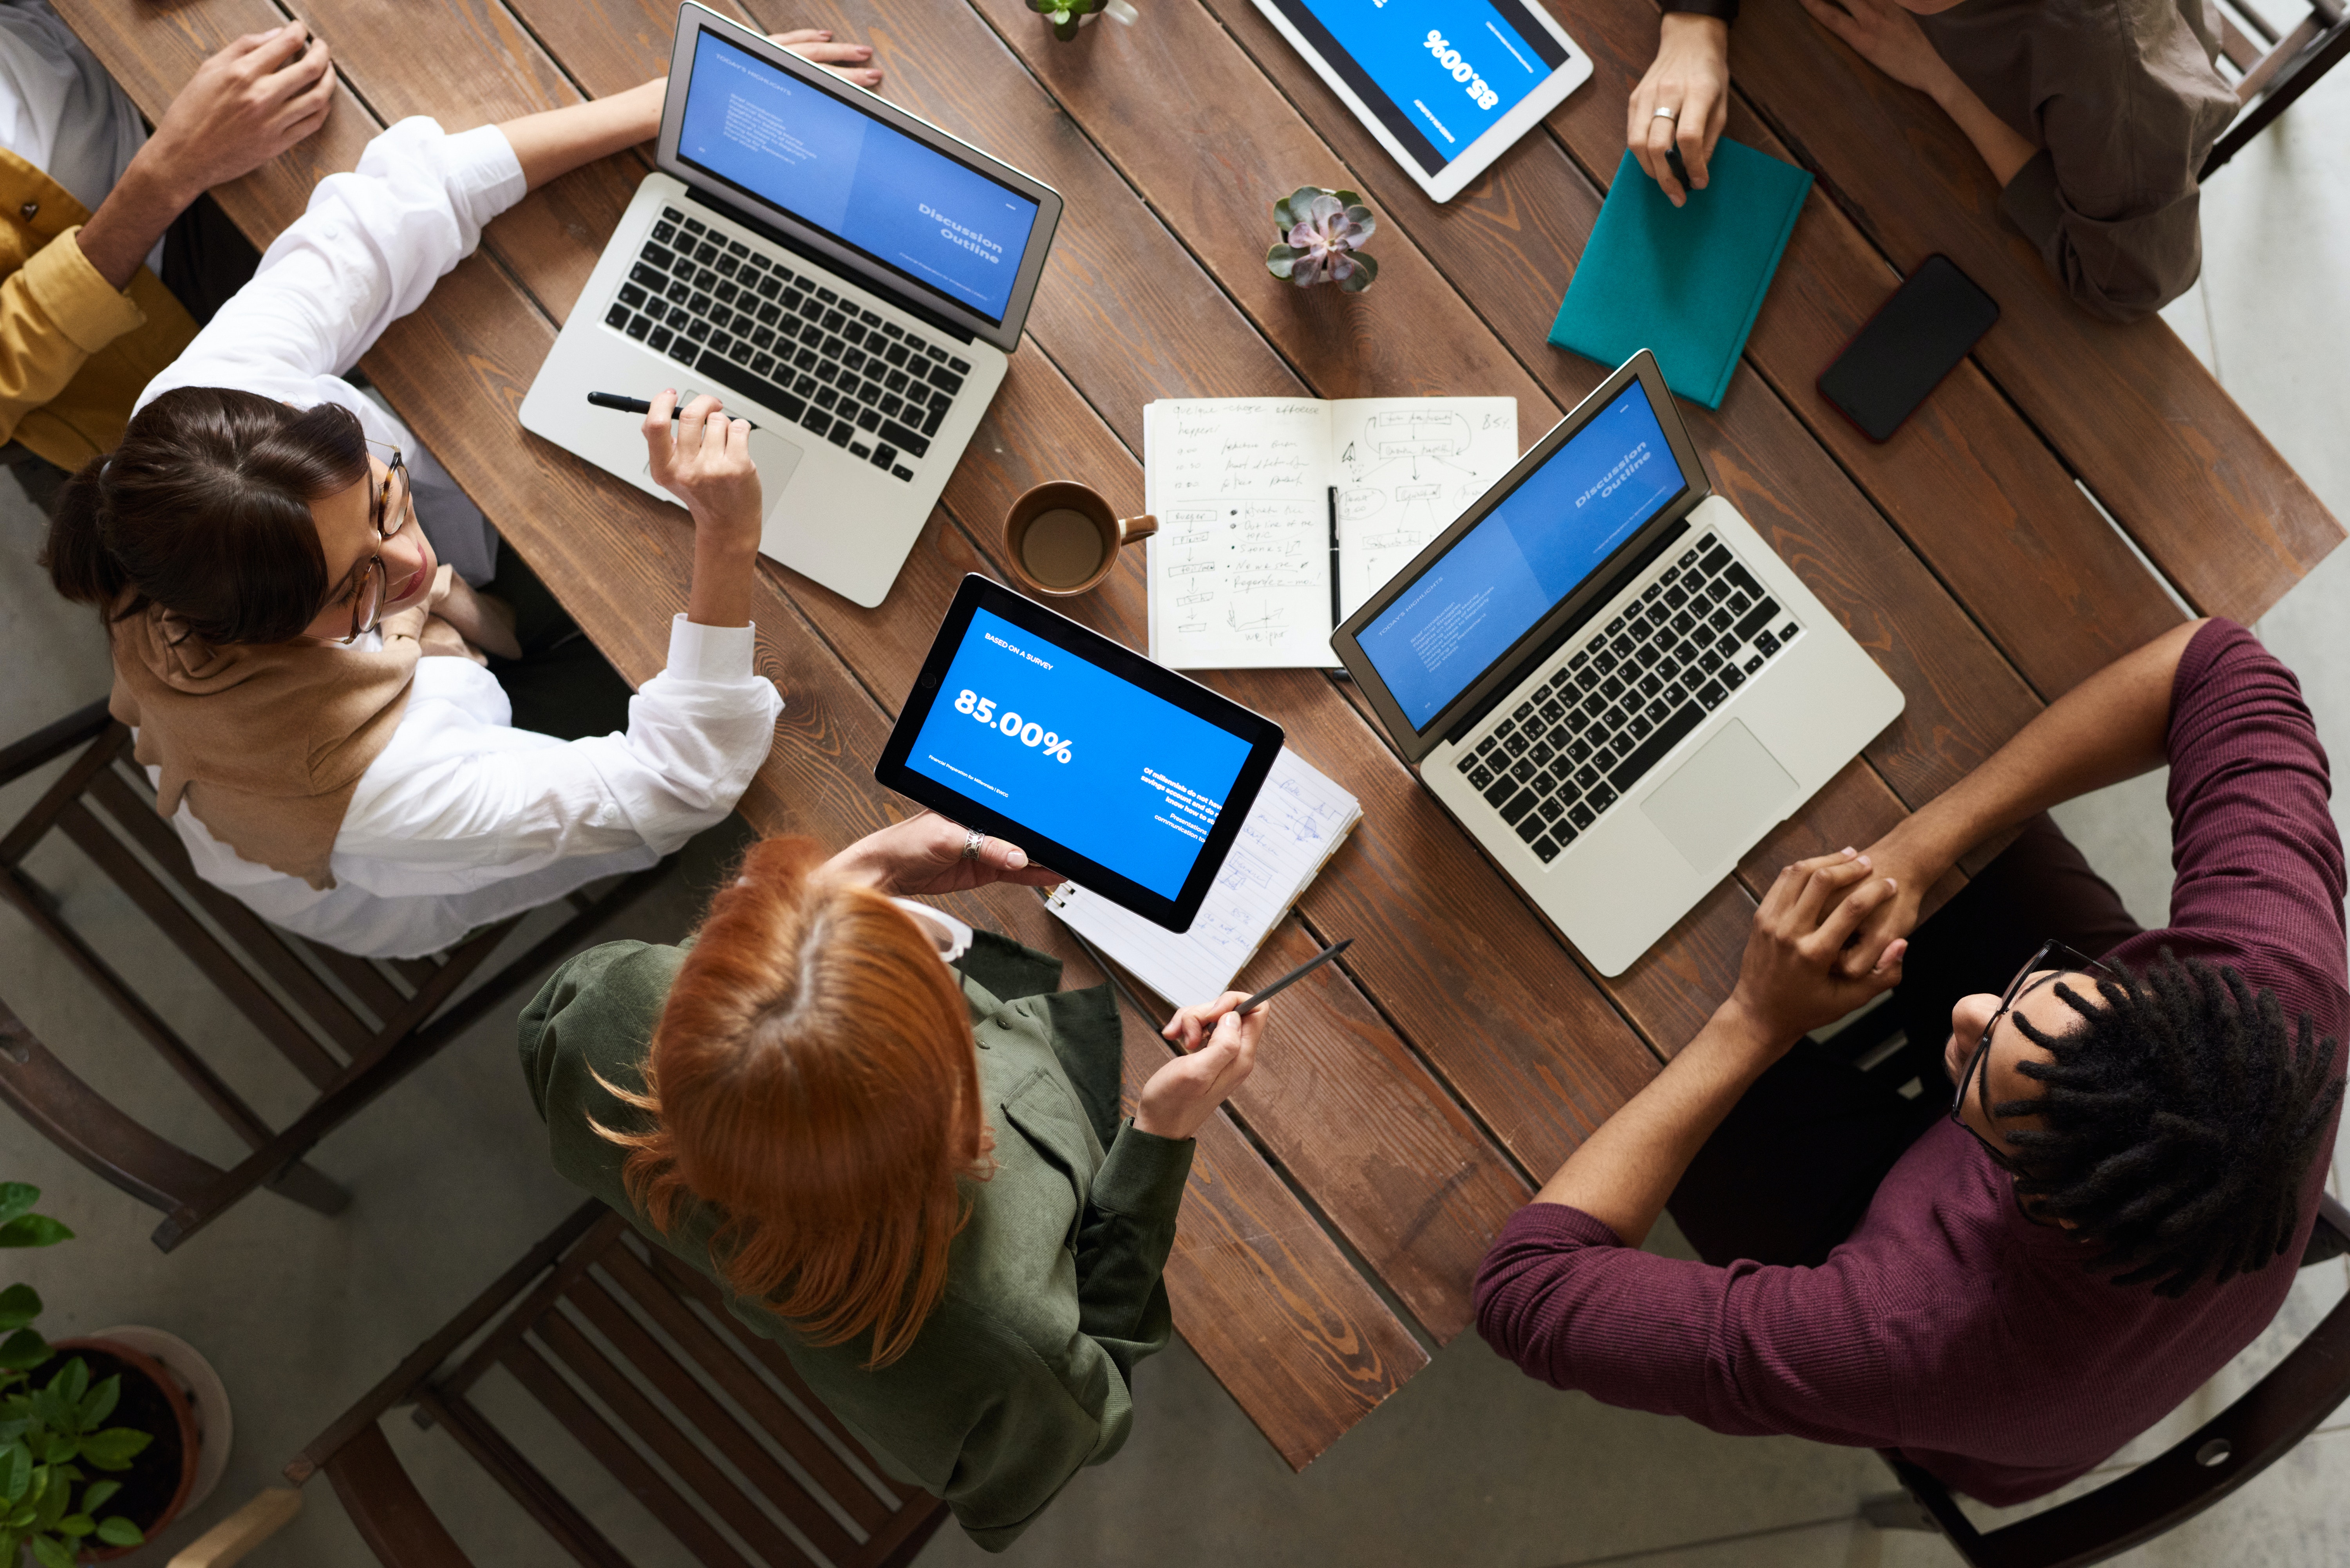 Top View Photo Of Group Of People Using Laptops